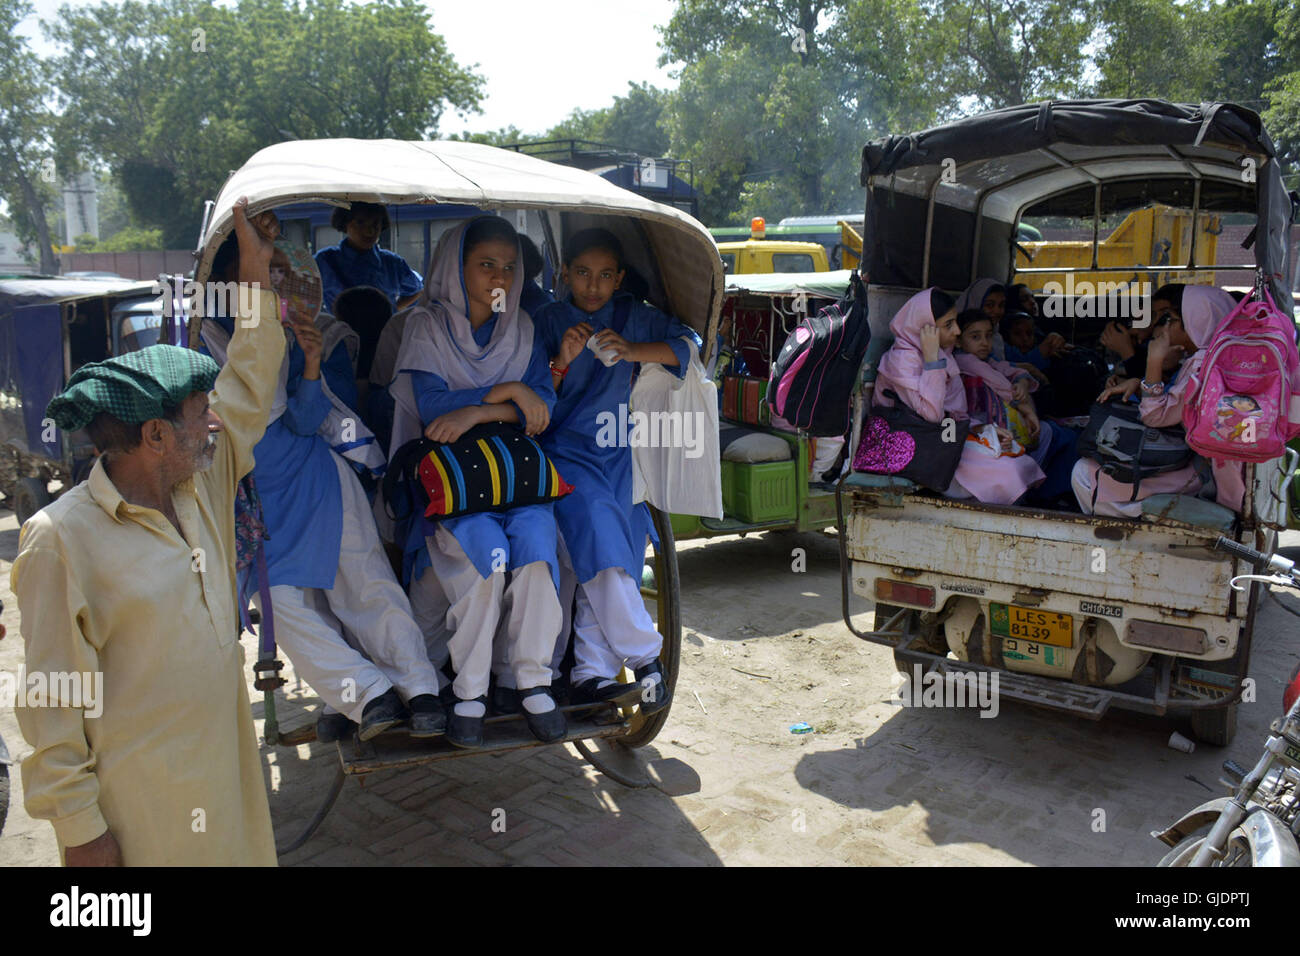 160815) -- LAHORE (PAKISTAN), Aug. 15, 2016 (Xinhua) -- Students arrive at  a school after summer vacations in eastern Pakistan's Lahore, on Aug. 15,  2016. Government and private schools in Pakistan's Punjab